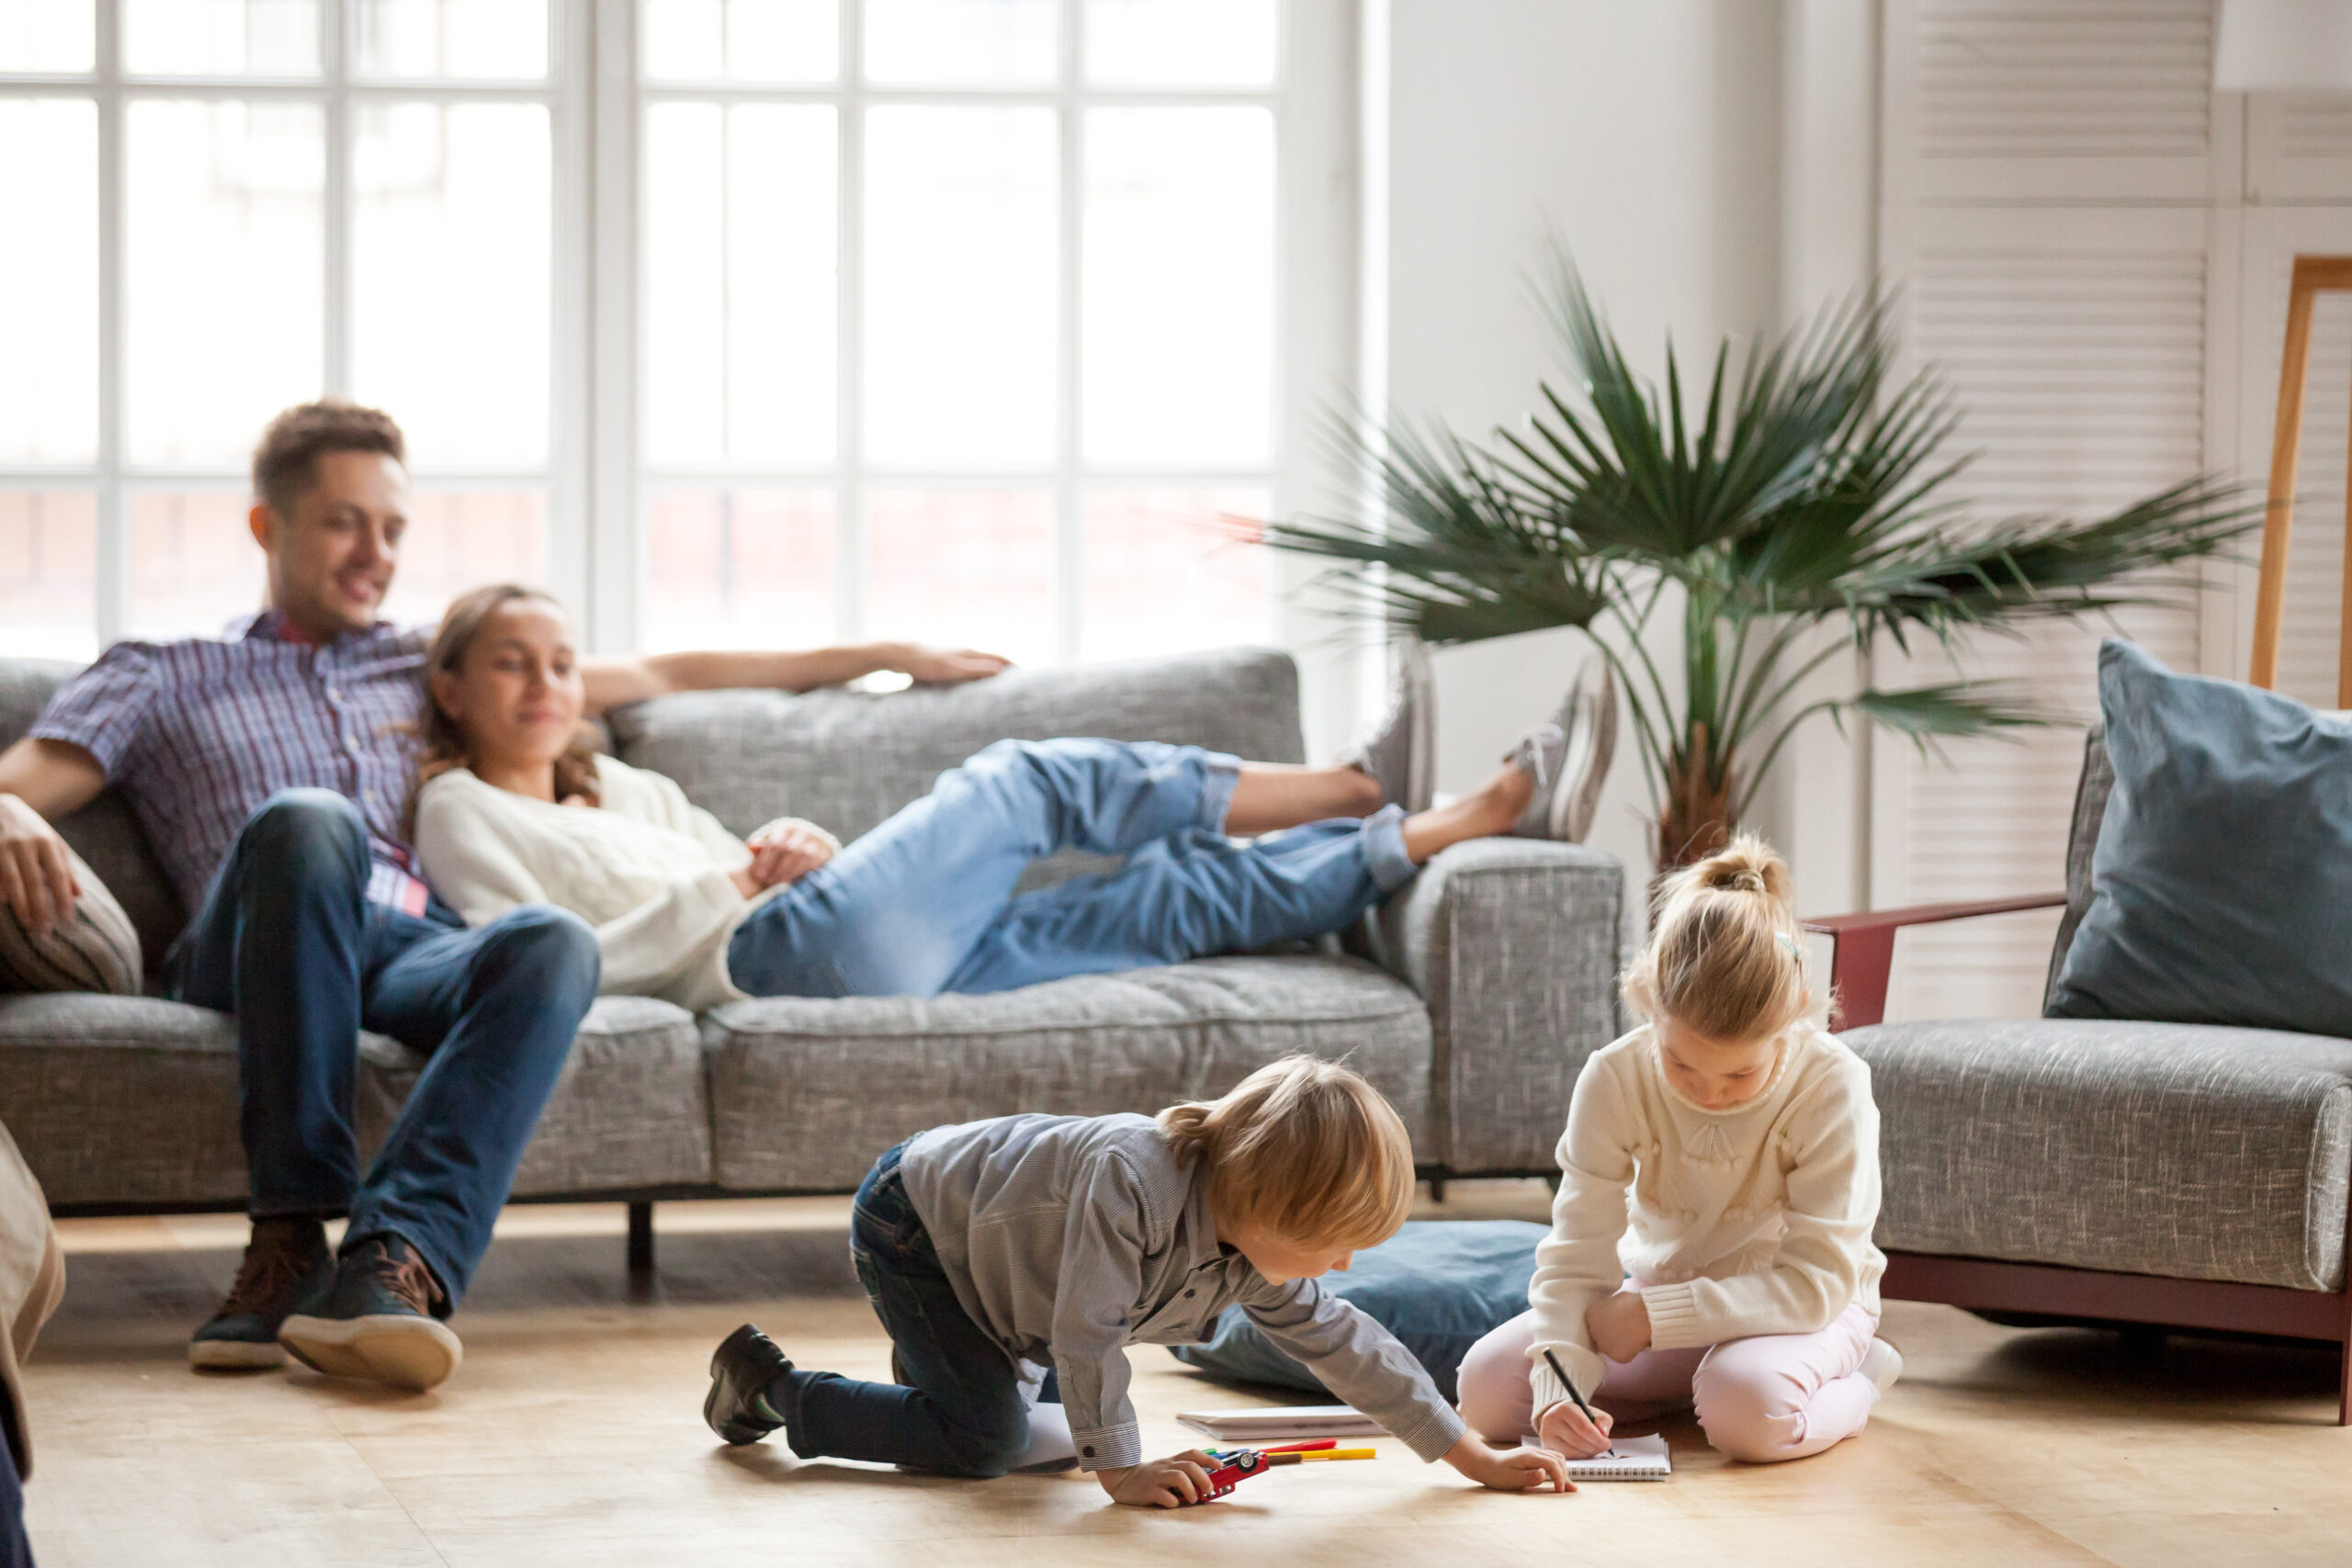 mother and father relaxing on couch watching son and daughter play on floor